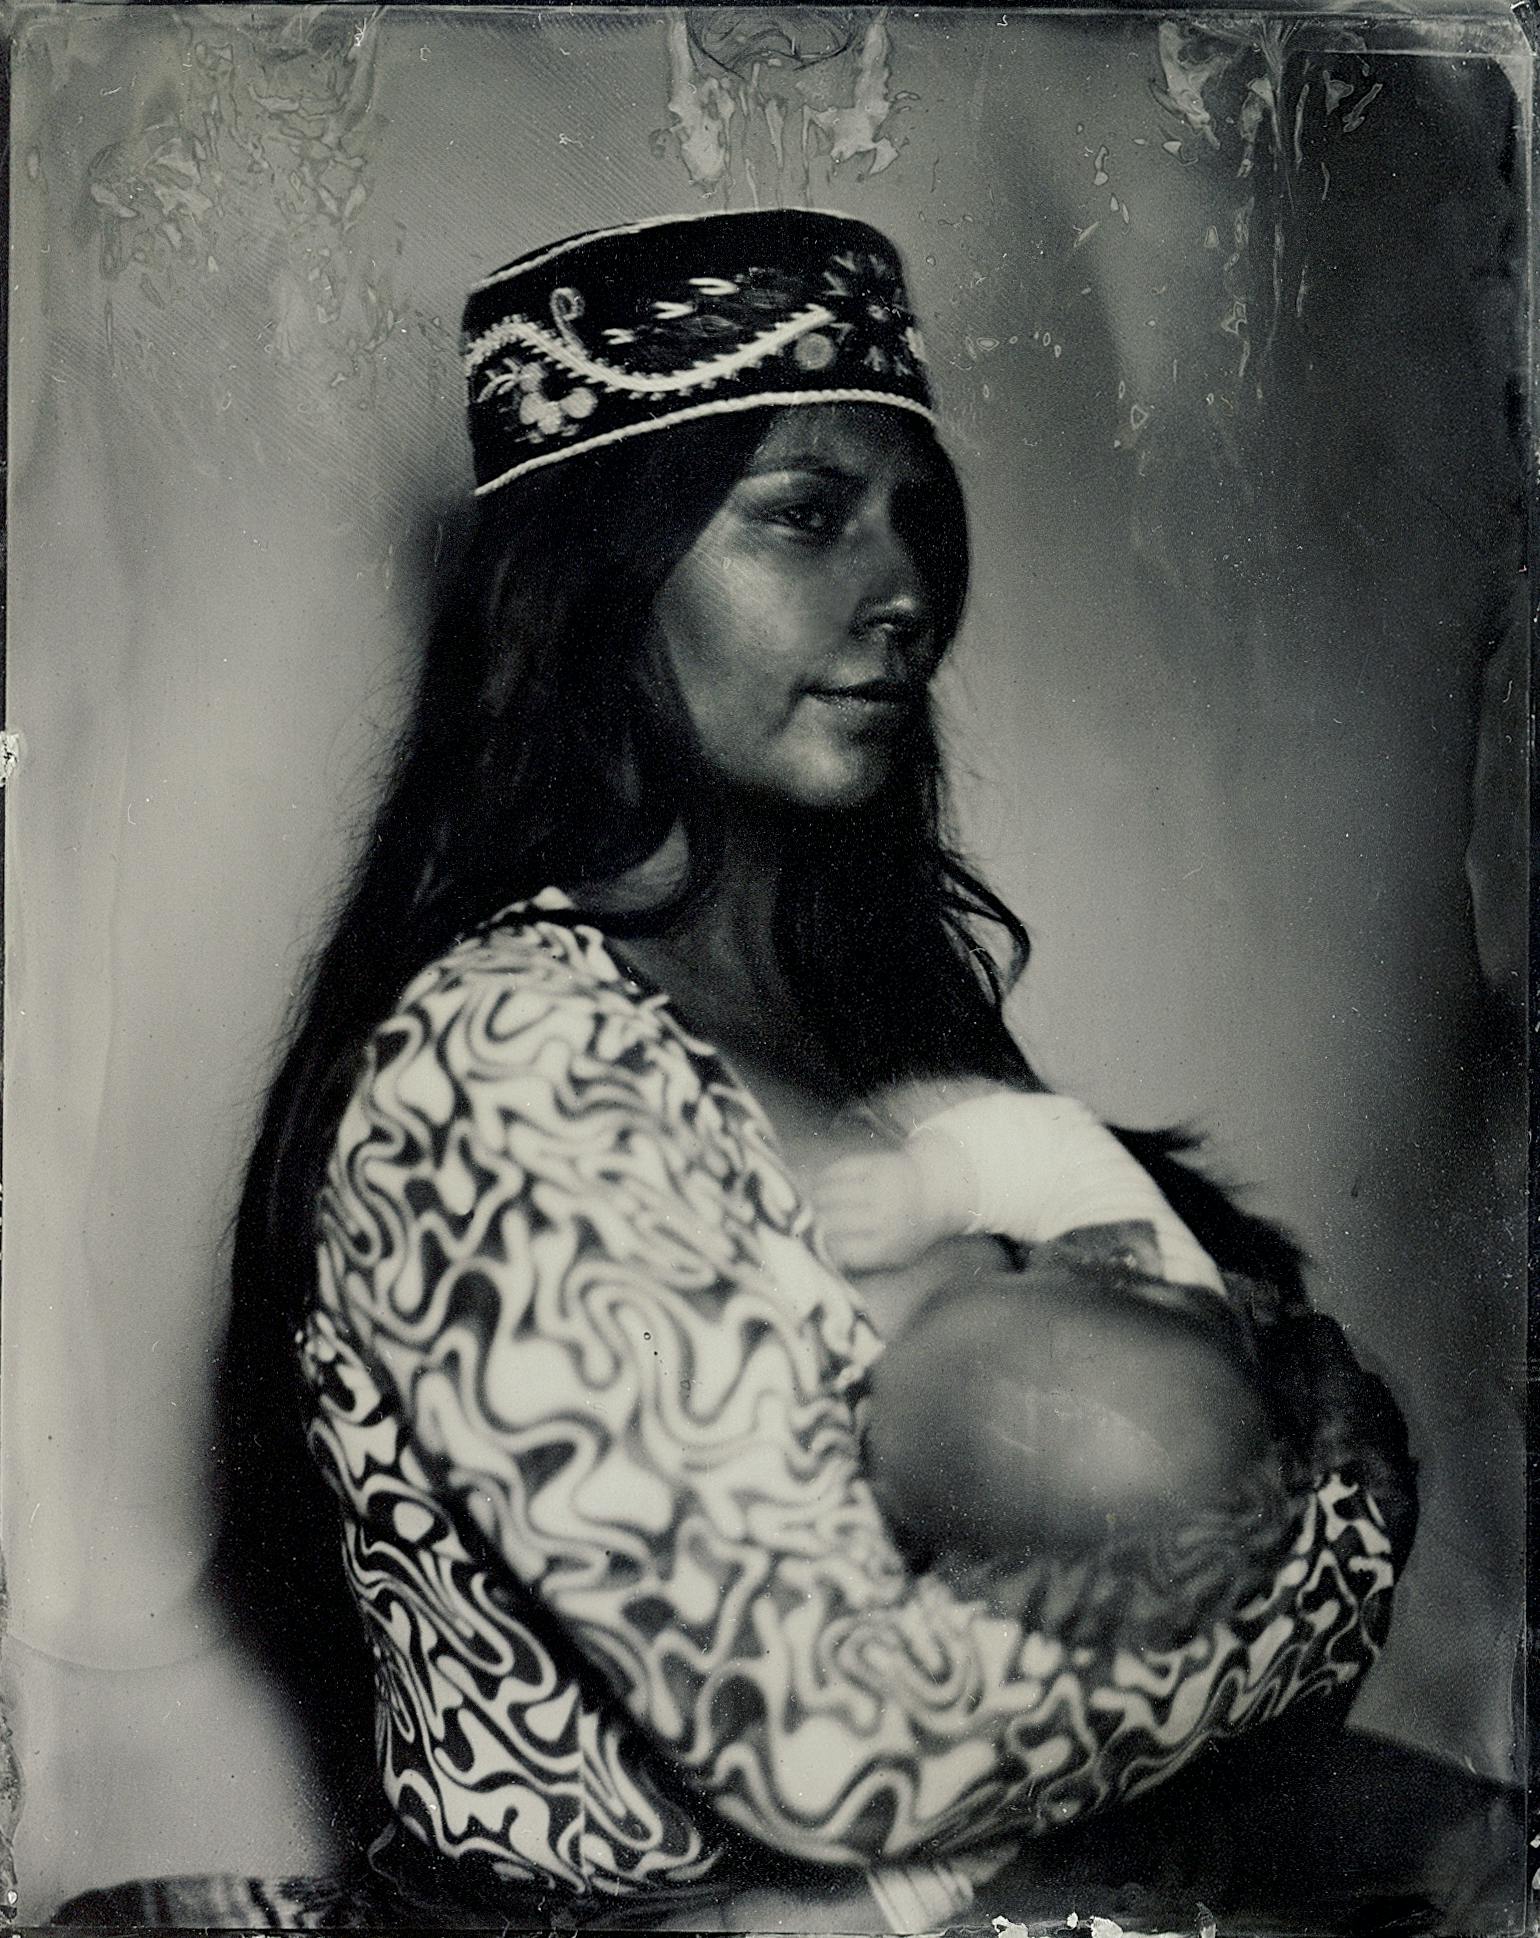 A tintype image of Audie Murray in profile. She is holding a baby in her arms.